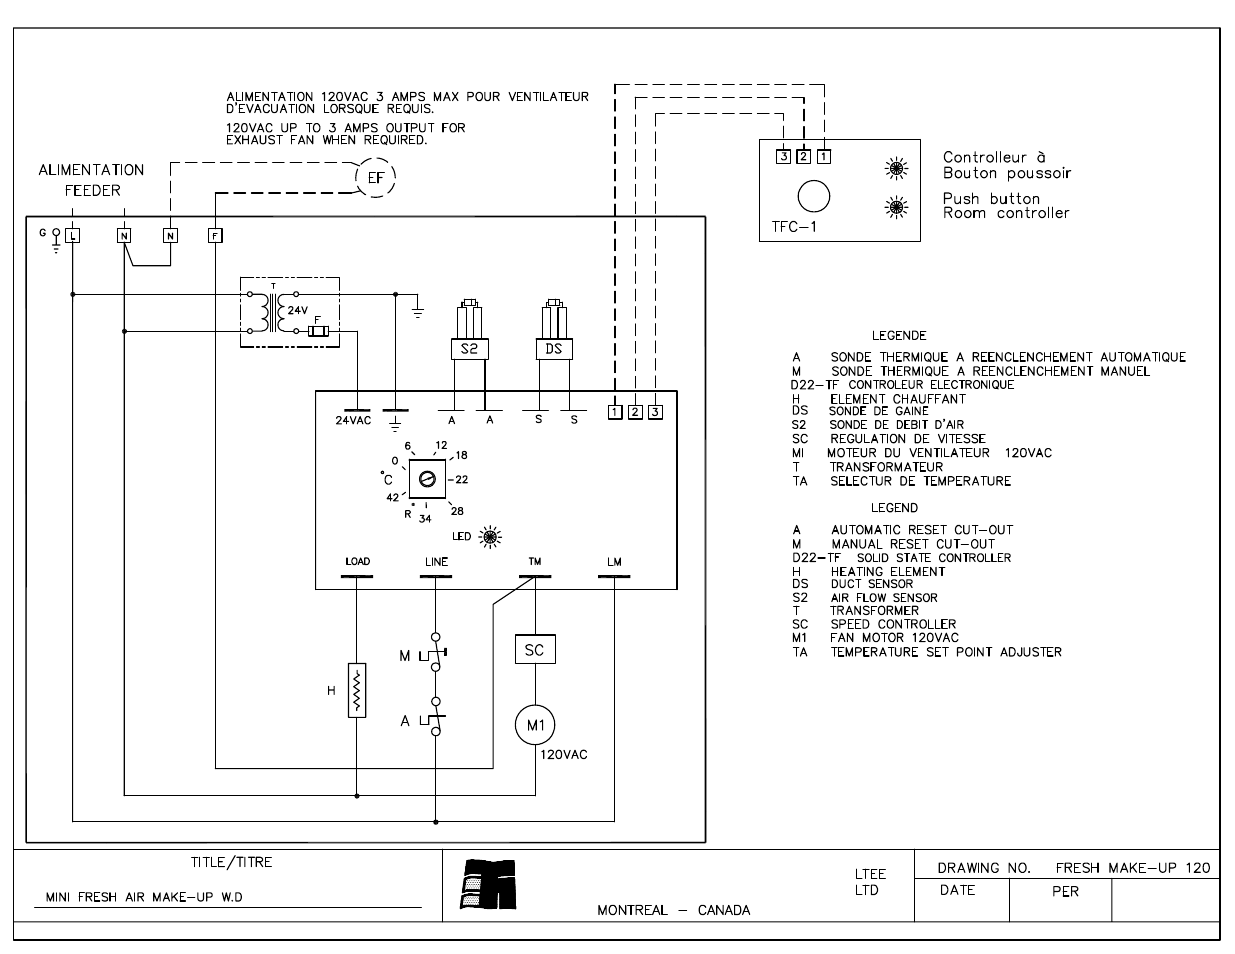 Thermo-x-air, Diagram for fresh make-up 120v, Thermolec | Thermolec ...